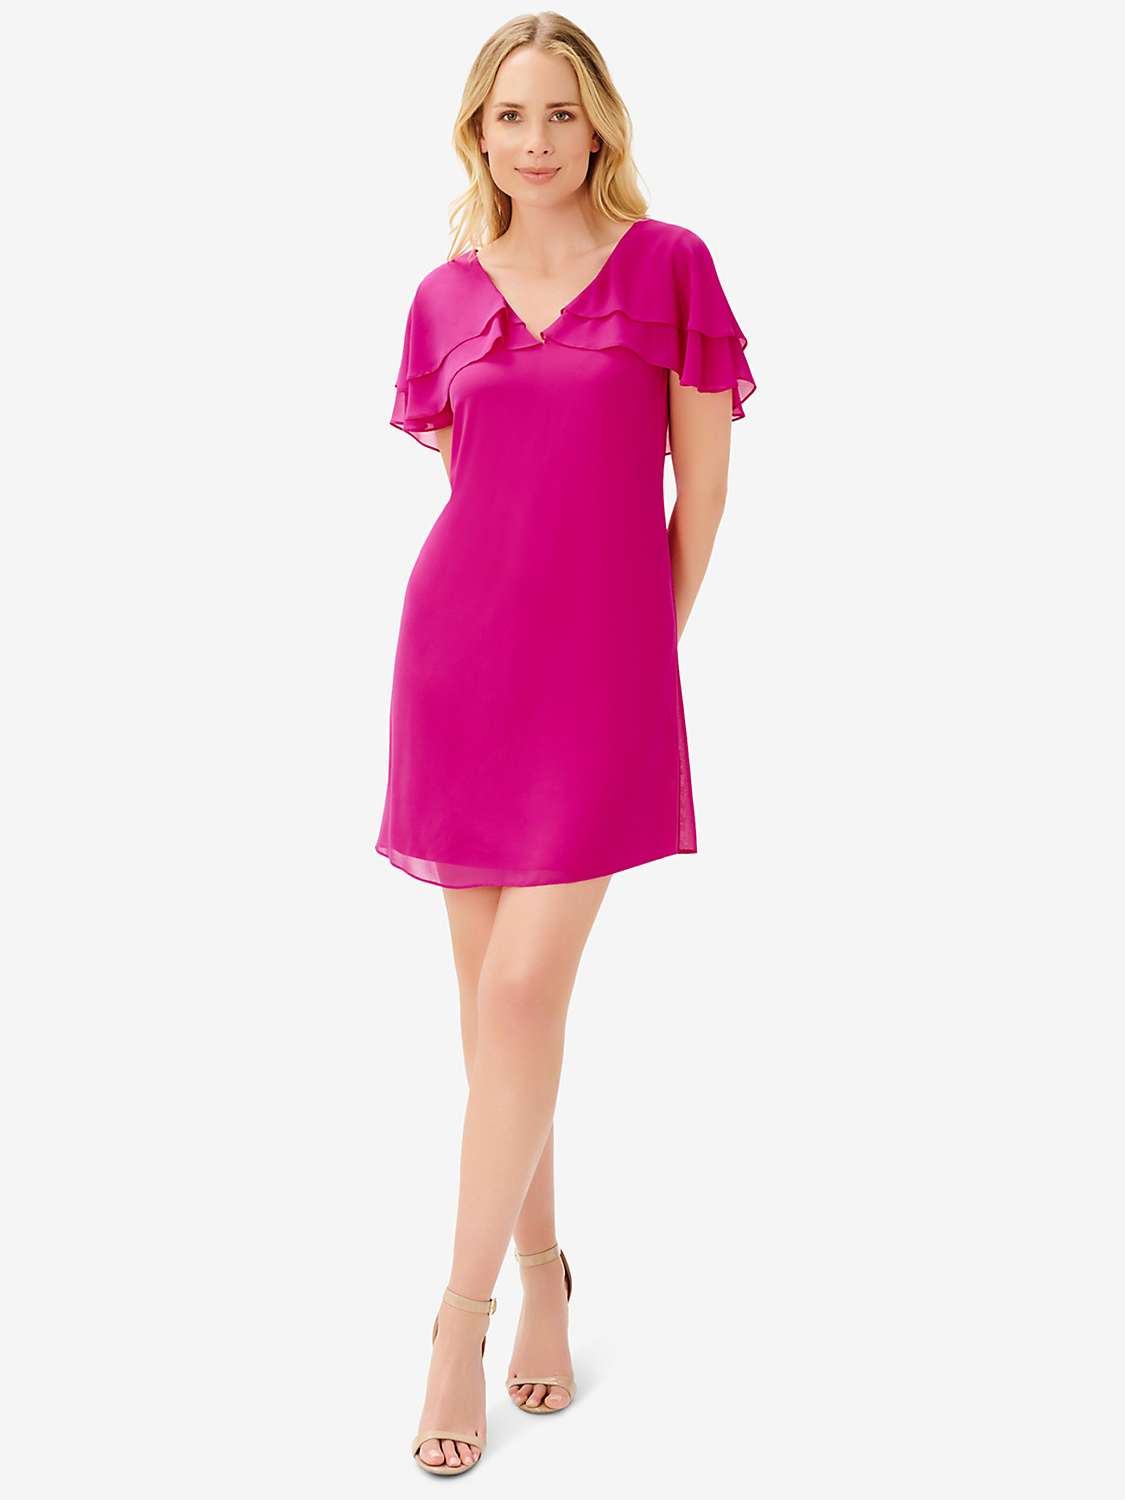 Buy Adrianna Papell Chiffon Shift Dress,  Adrianna Papell Online at johnlewis.com